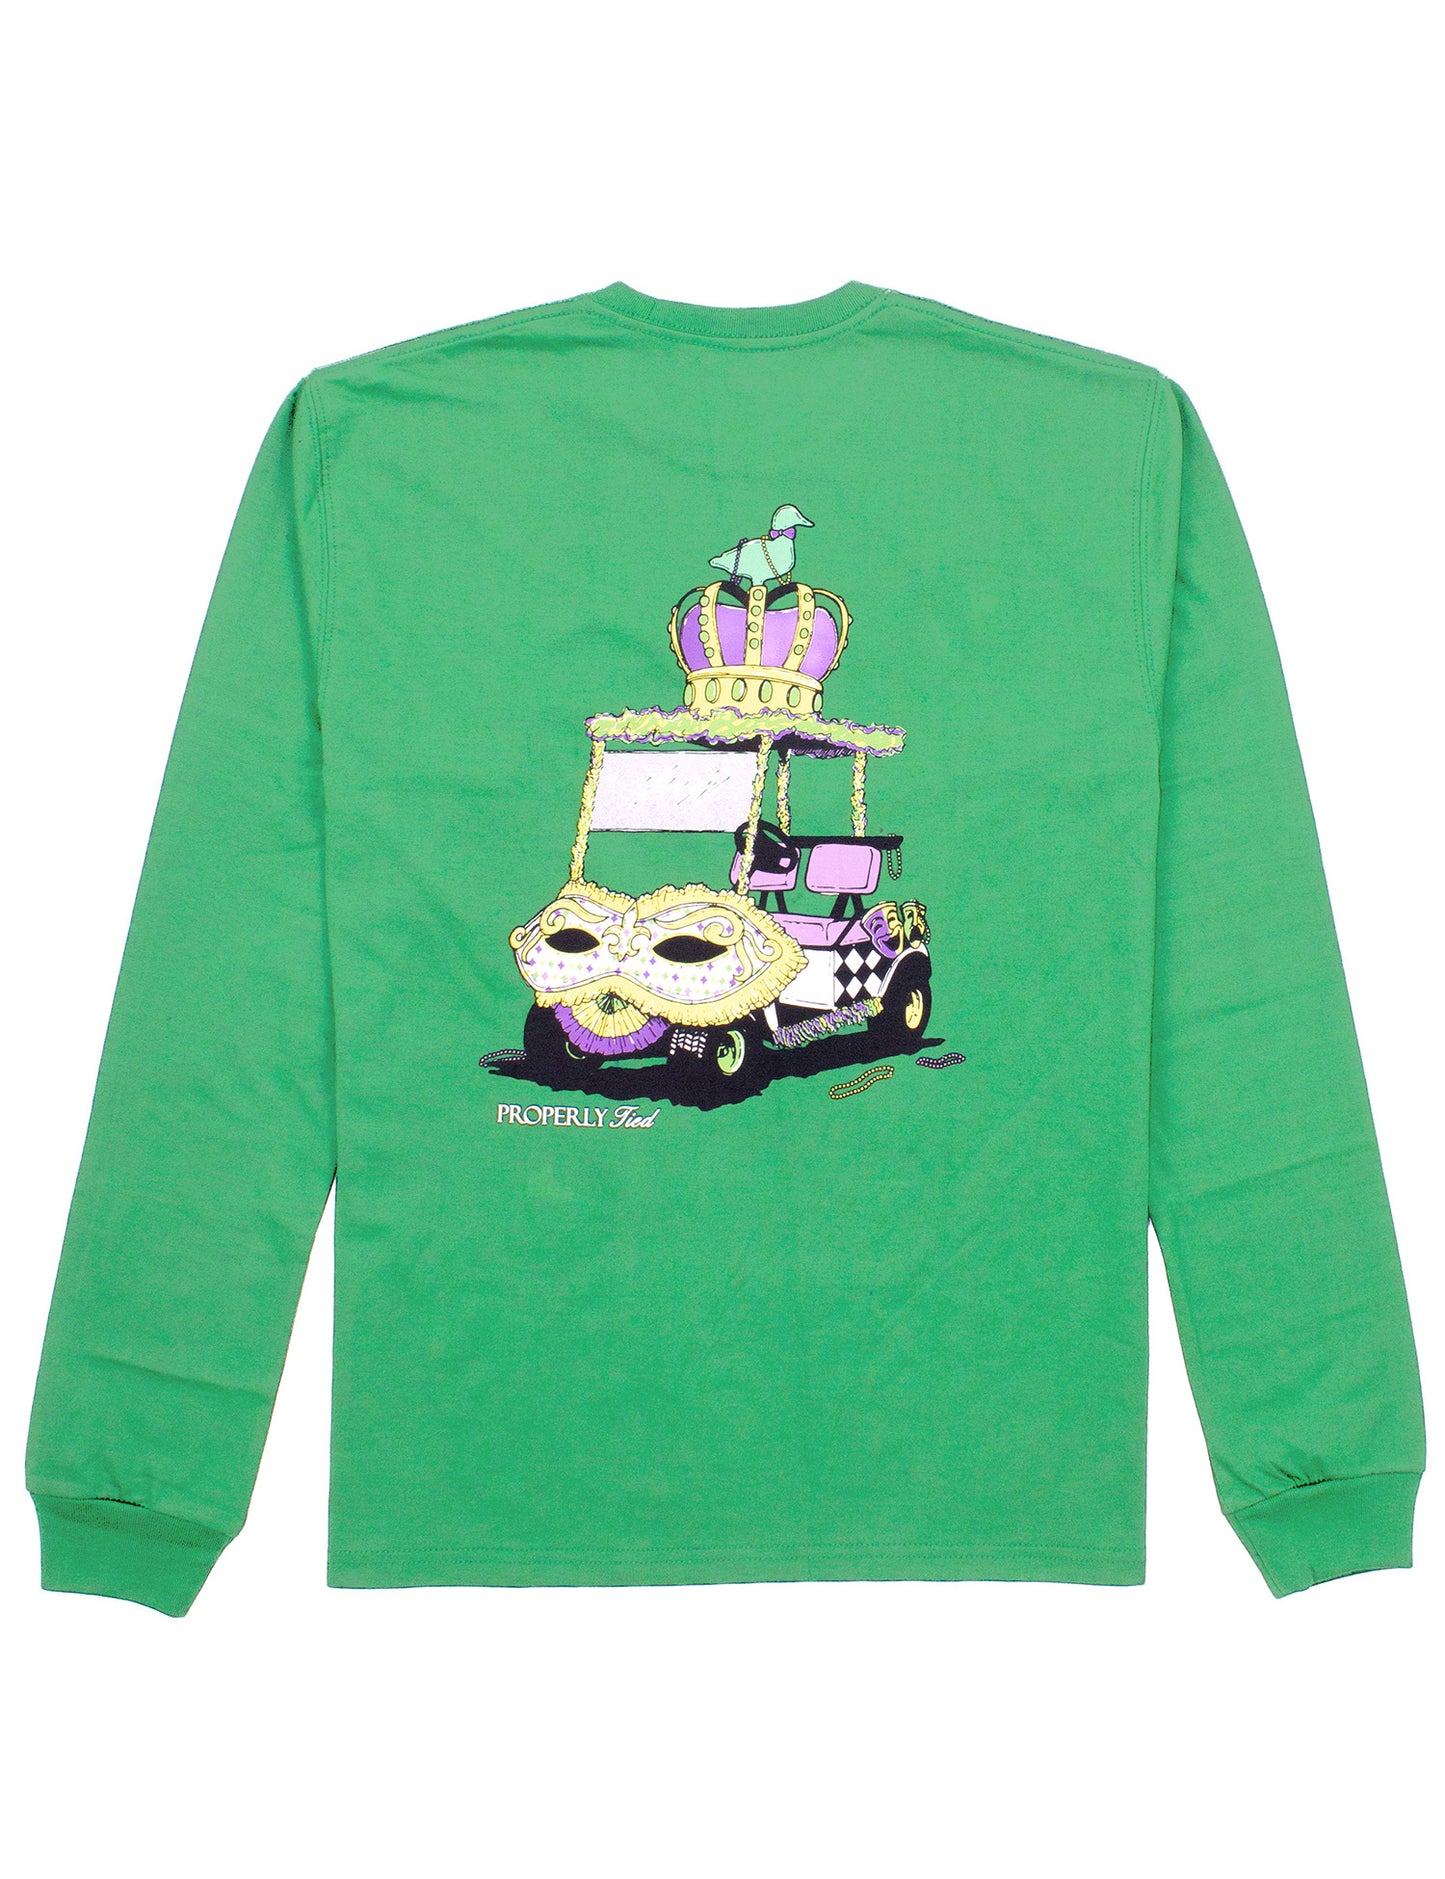 The Properly Tied Mardi Cart Adult Long Sleeve T-shirt is a vibrant green shirt featuring a picture of a car and mask. It is made with breathable fabric, providing comfort for adults.